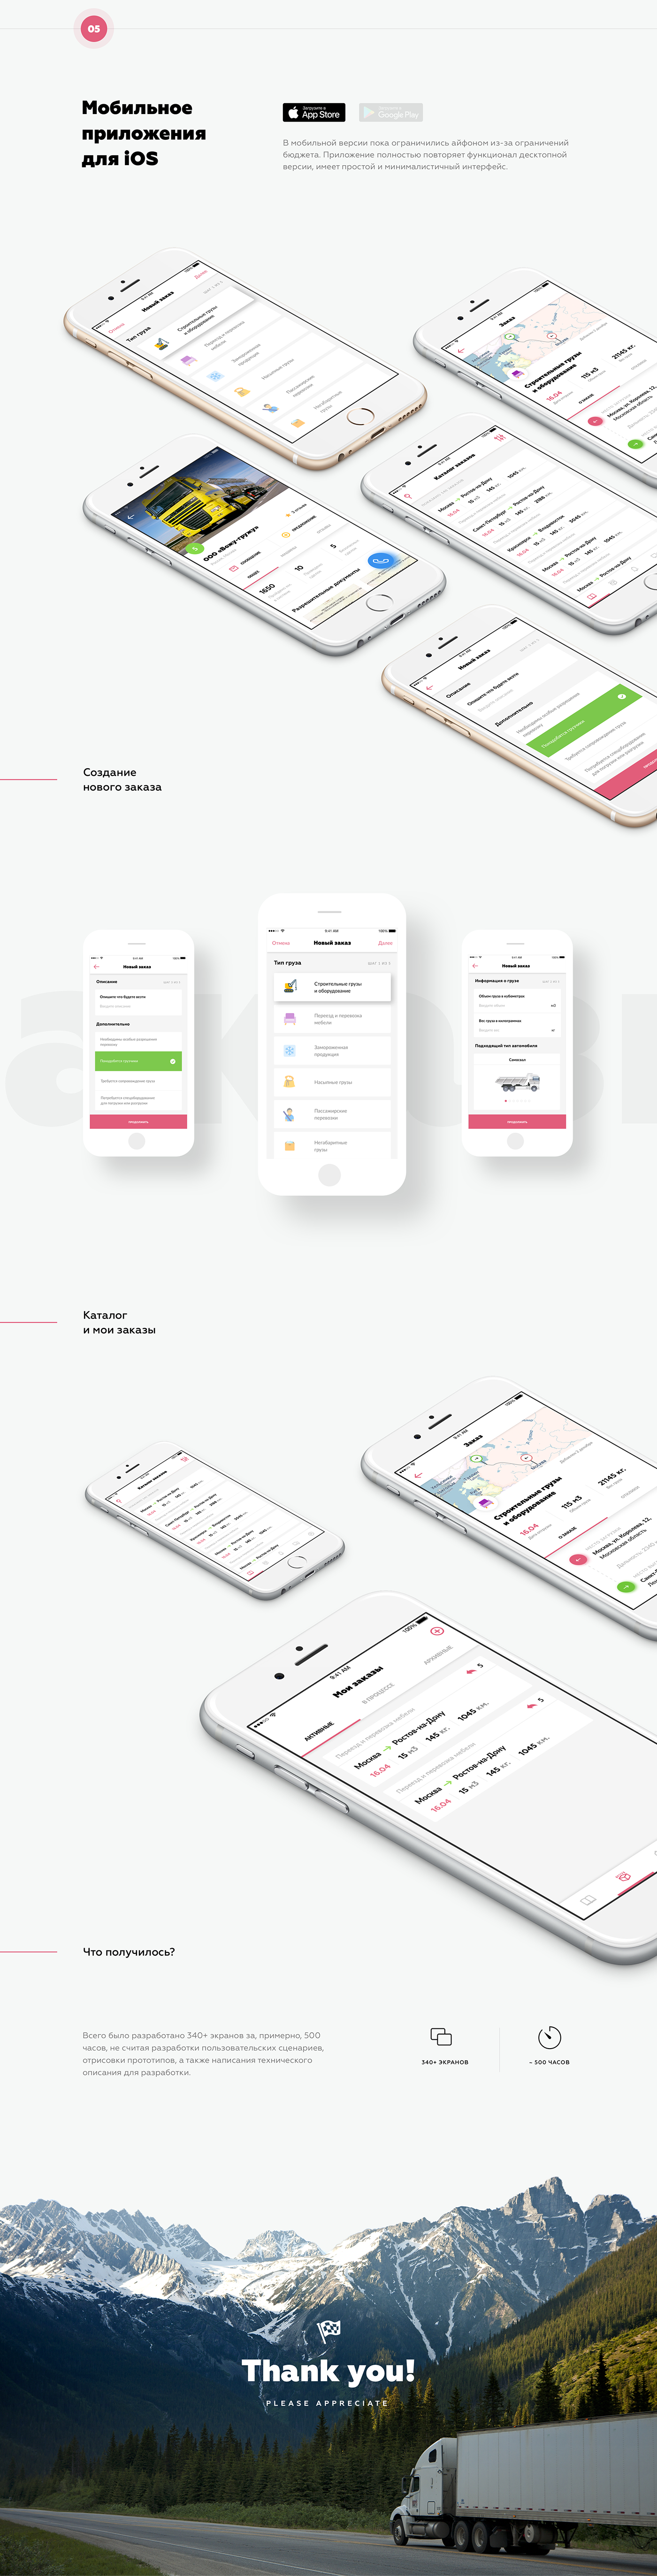 Web mobile Truck UI/UX service move ios Interface